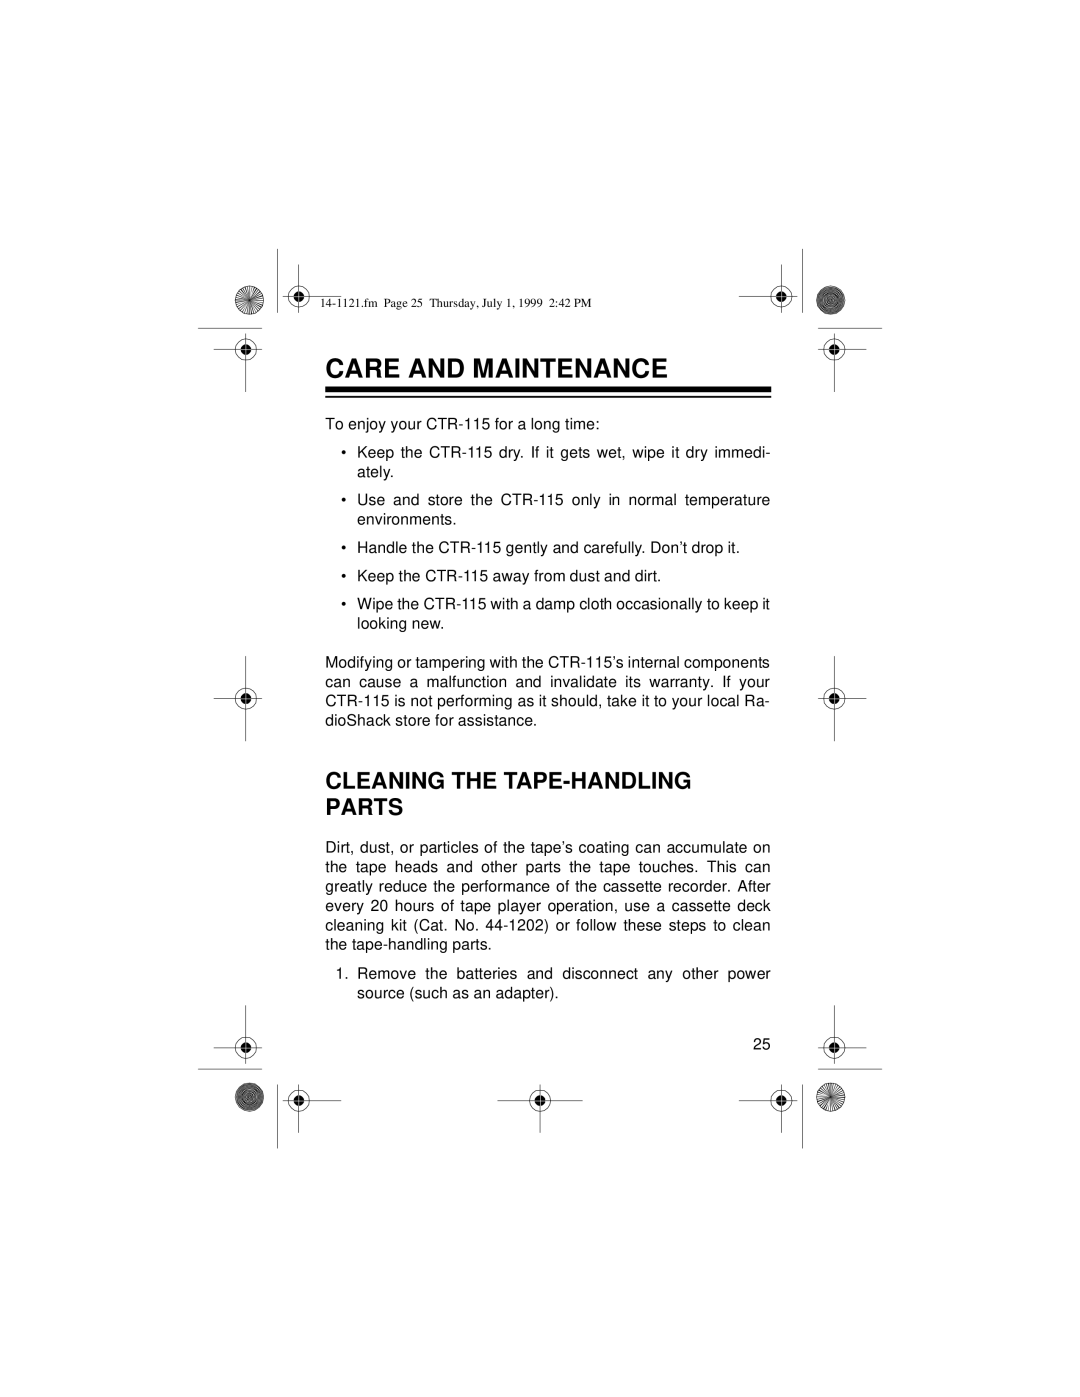 Optimus 14-1121, CTR-115, 2133-920-0-01 owner manual Care And Maintenance, Cleaning The Tape-Handlingparts 